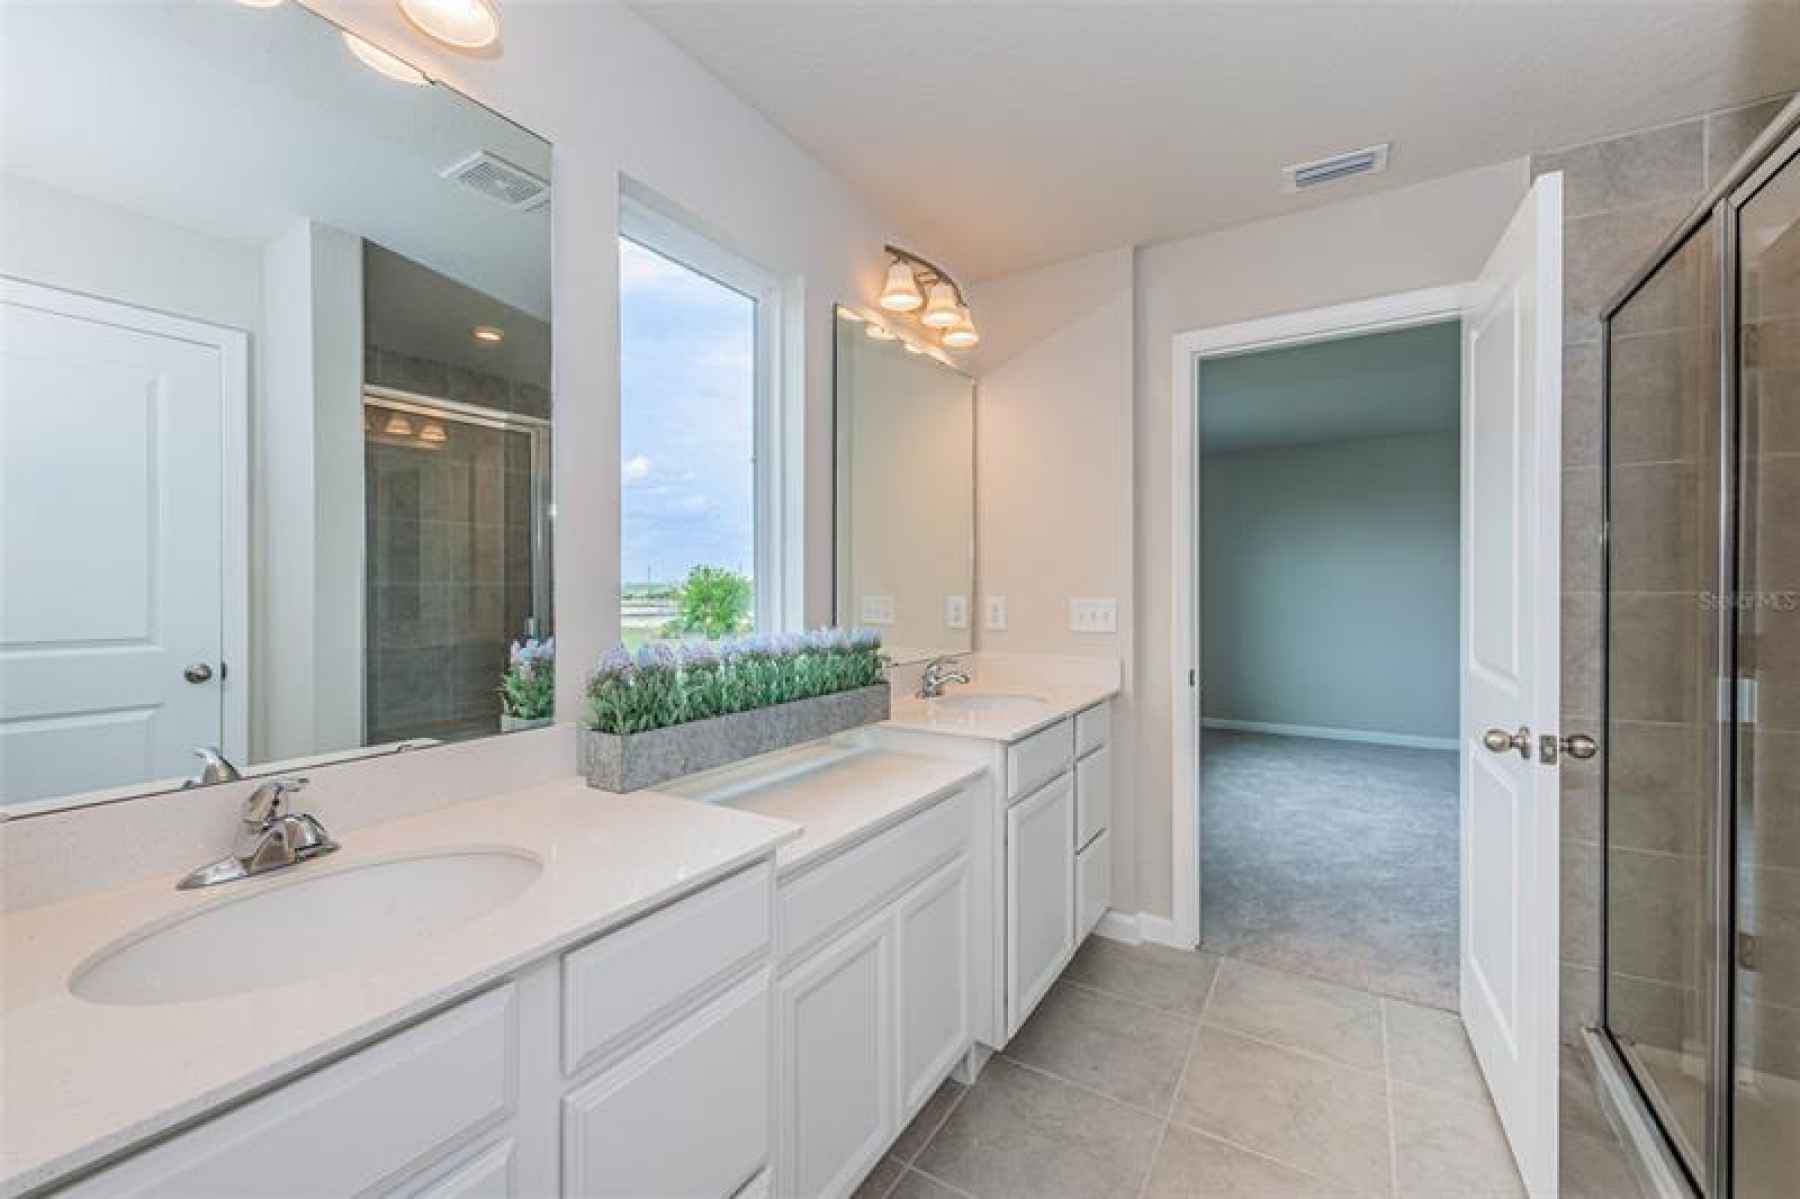 Owner's Suite Bath with dual sinks, make-up area, separate shower, water closet and one of two walk-